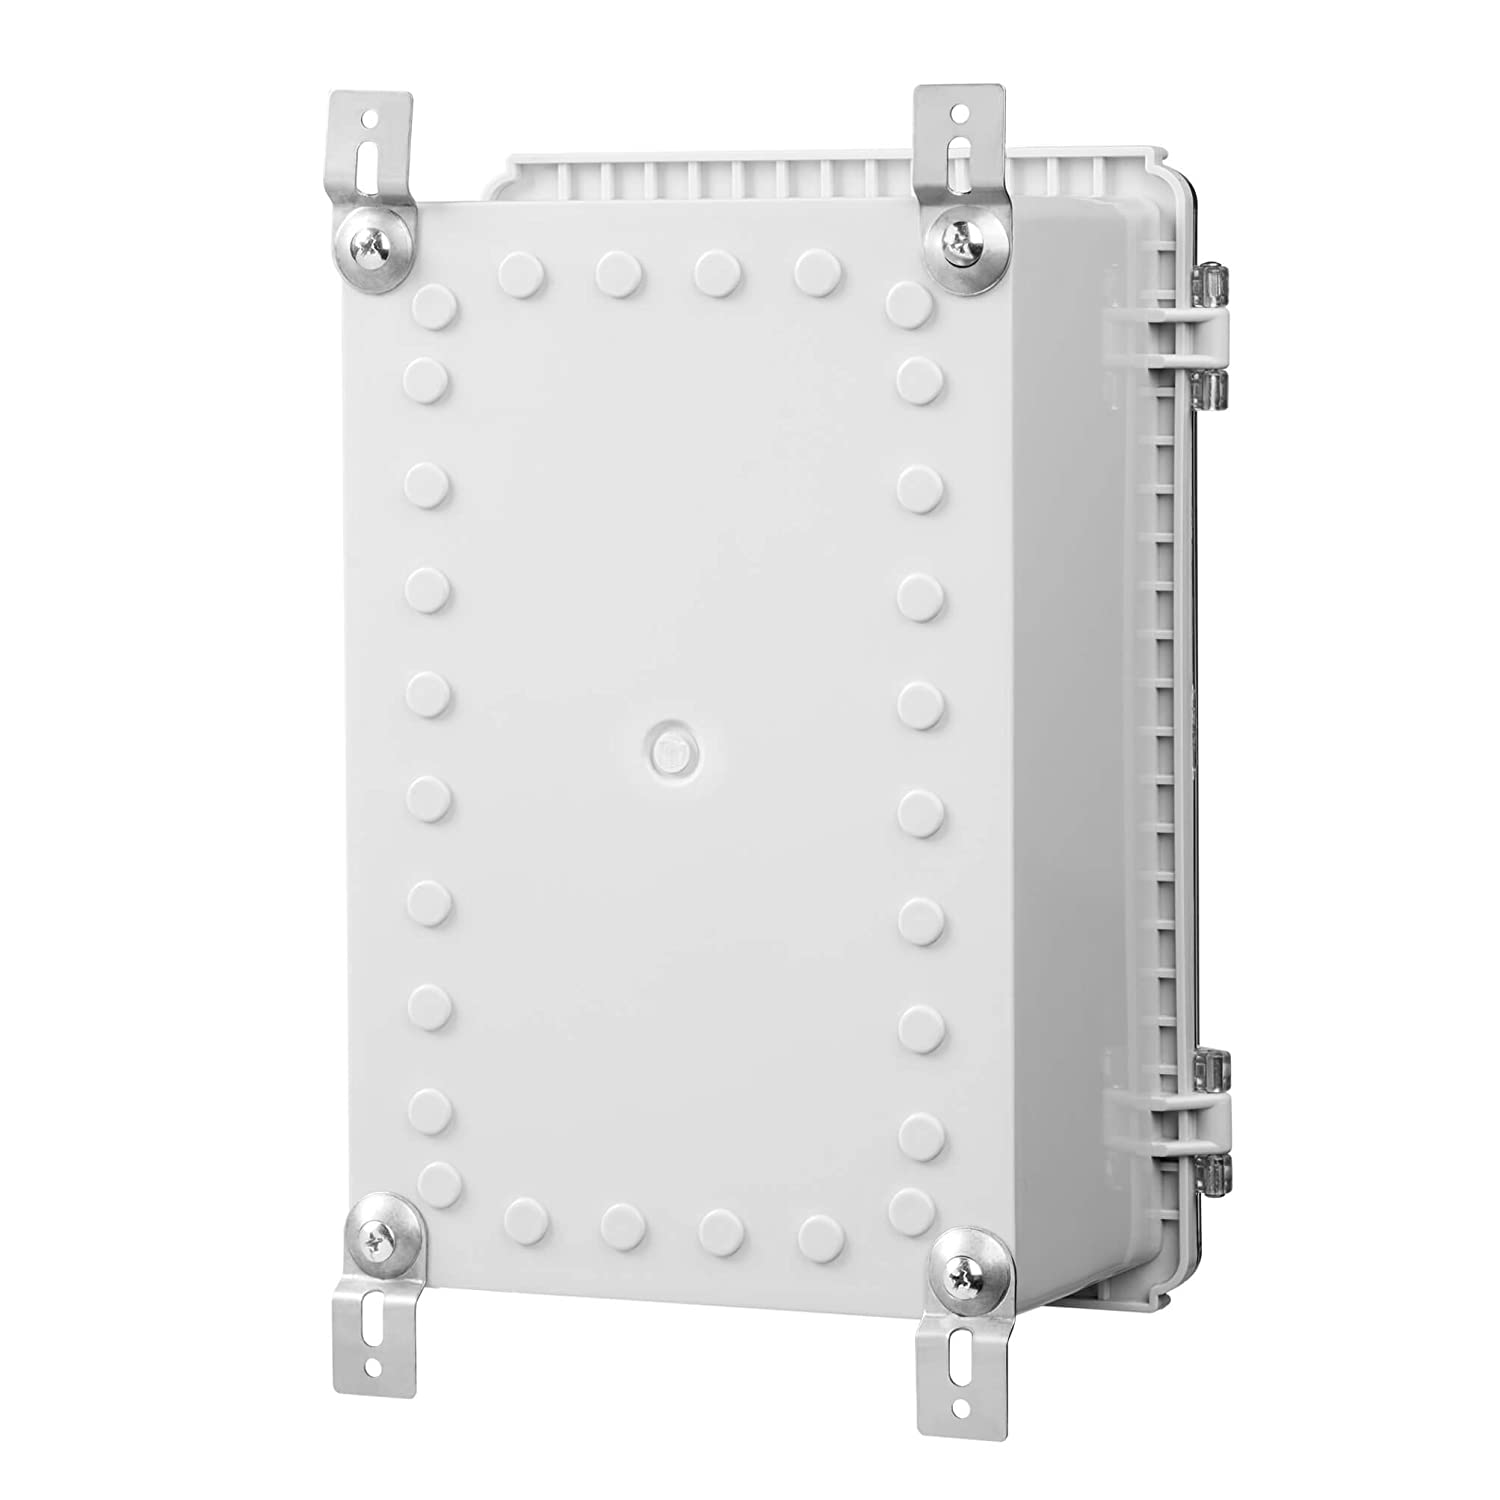 IP65 waterproof hinged enclosure for circuit board plastic box for electronics project junction housing290×190×140mm